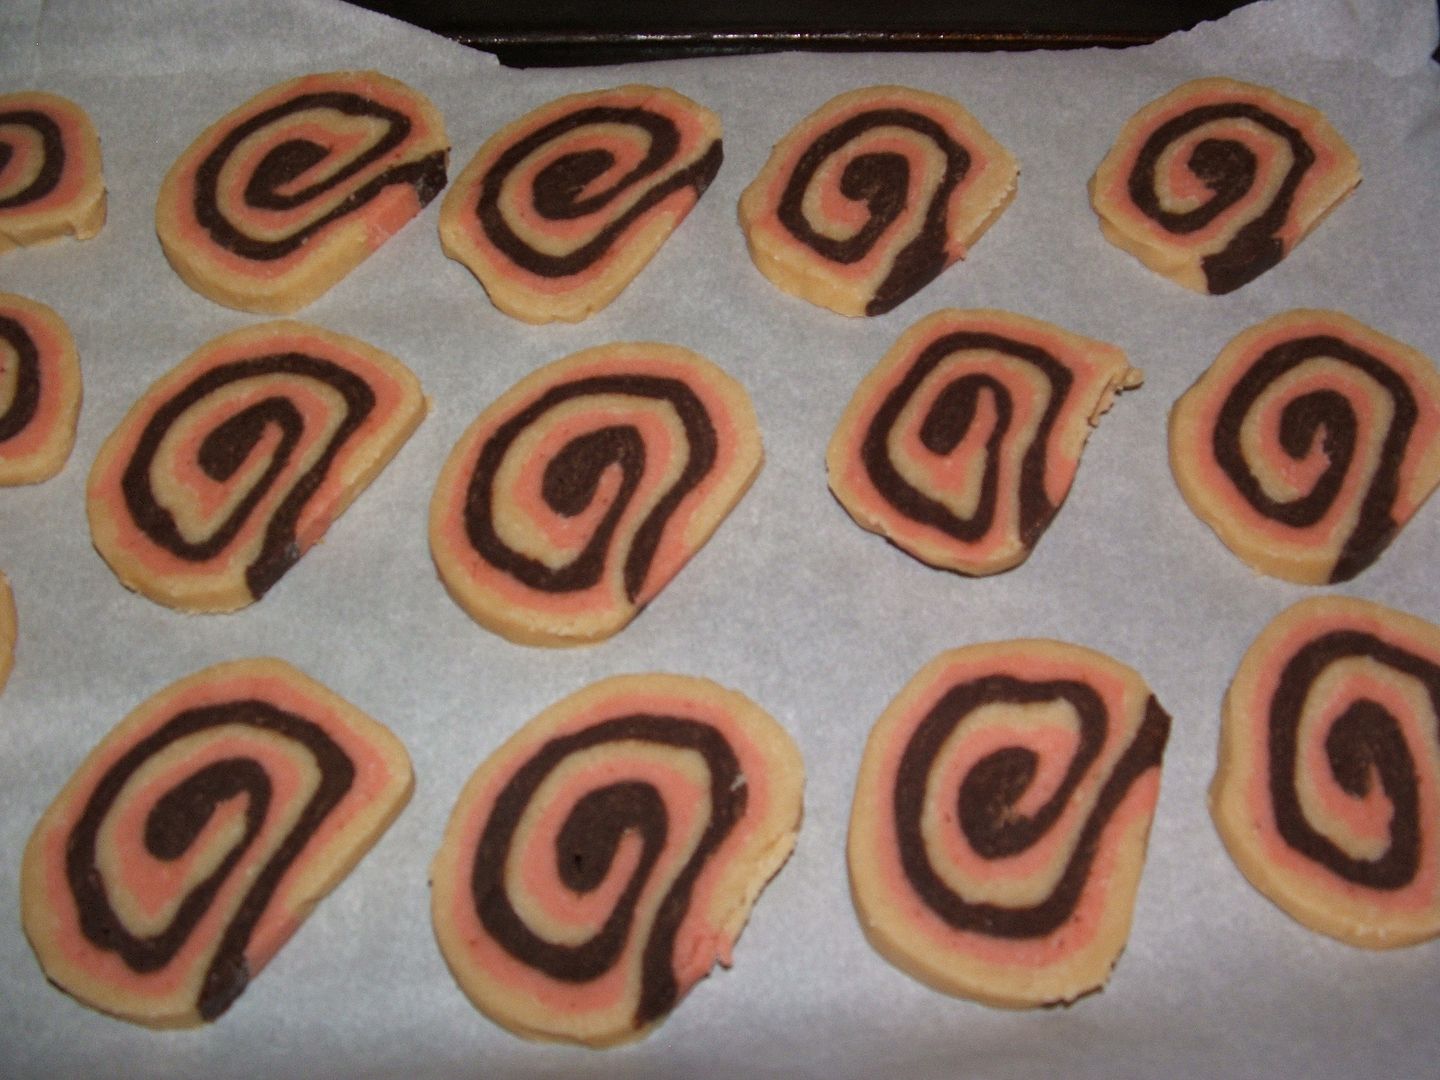 Neapolitan Swirl Refrigerator Cookies by Angie Ouellette-Tower for godsgrowinggarden.com photo 021_zpsn3nazgqm.jpg